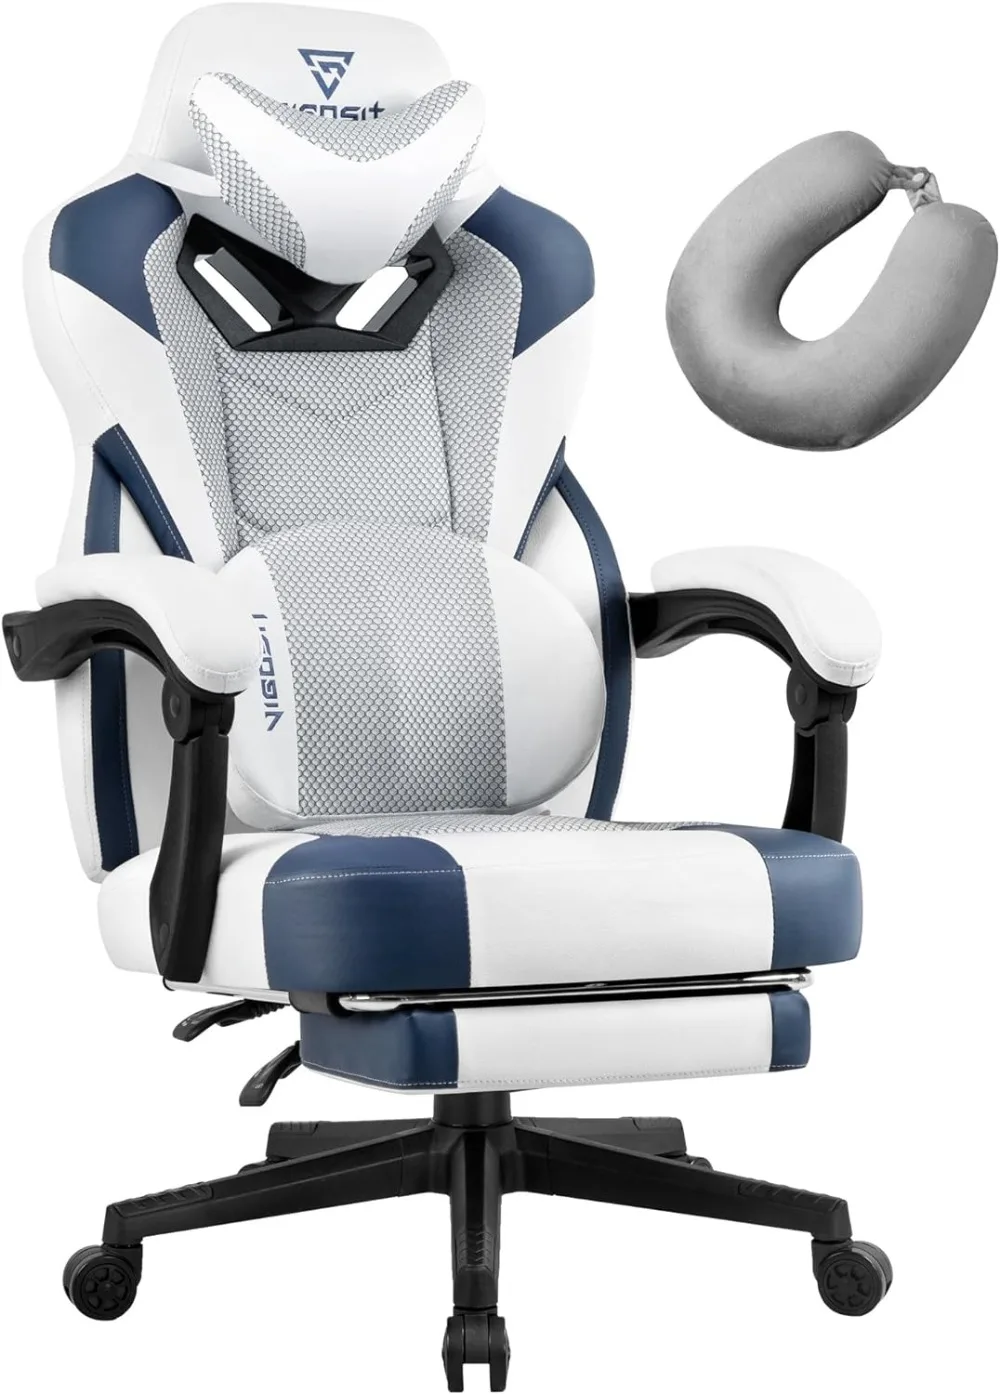 

Computer Armchair Gamer Chair Office Furniture Gaming Chair for the Computer Mobile Relaxing Backrest Ergonomic Reclining Wheels